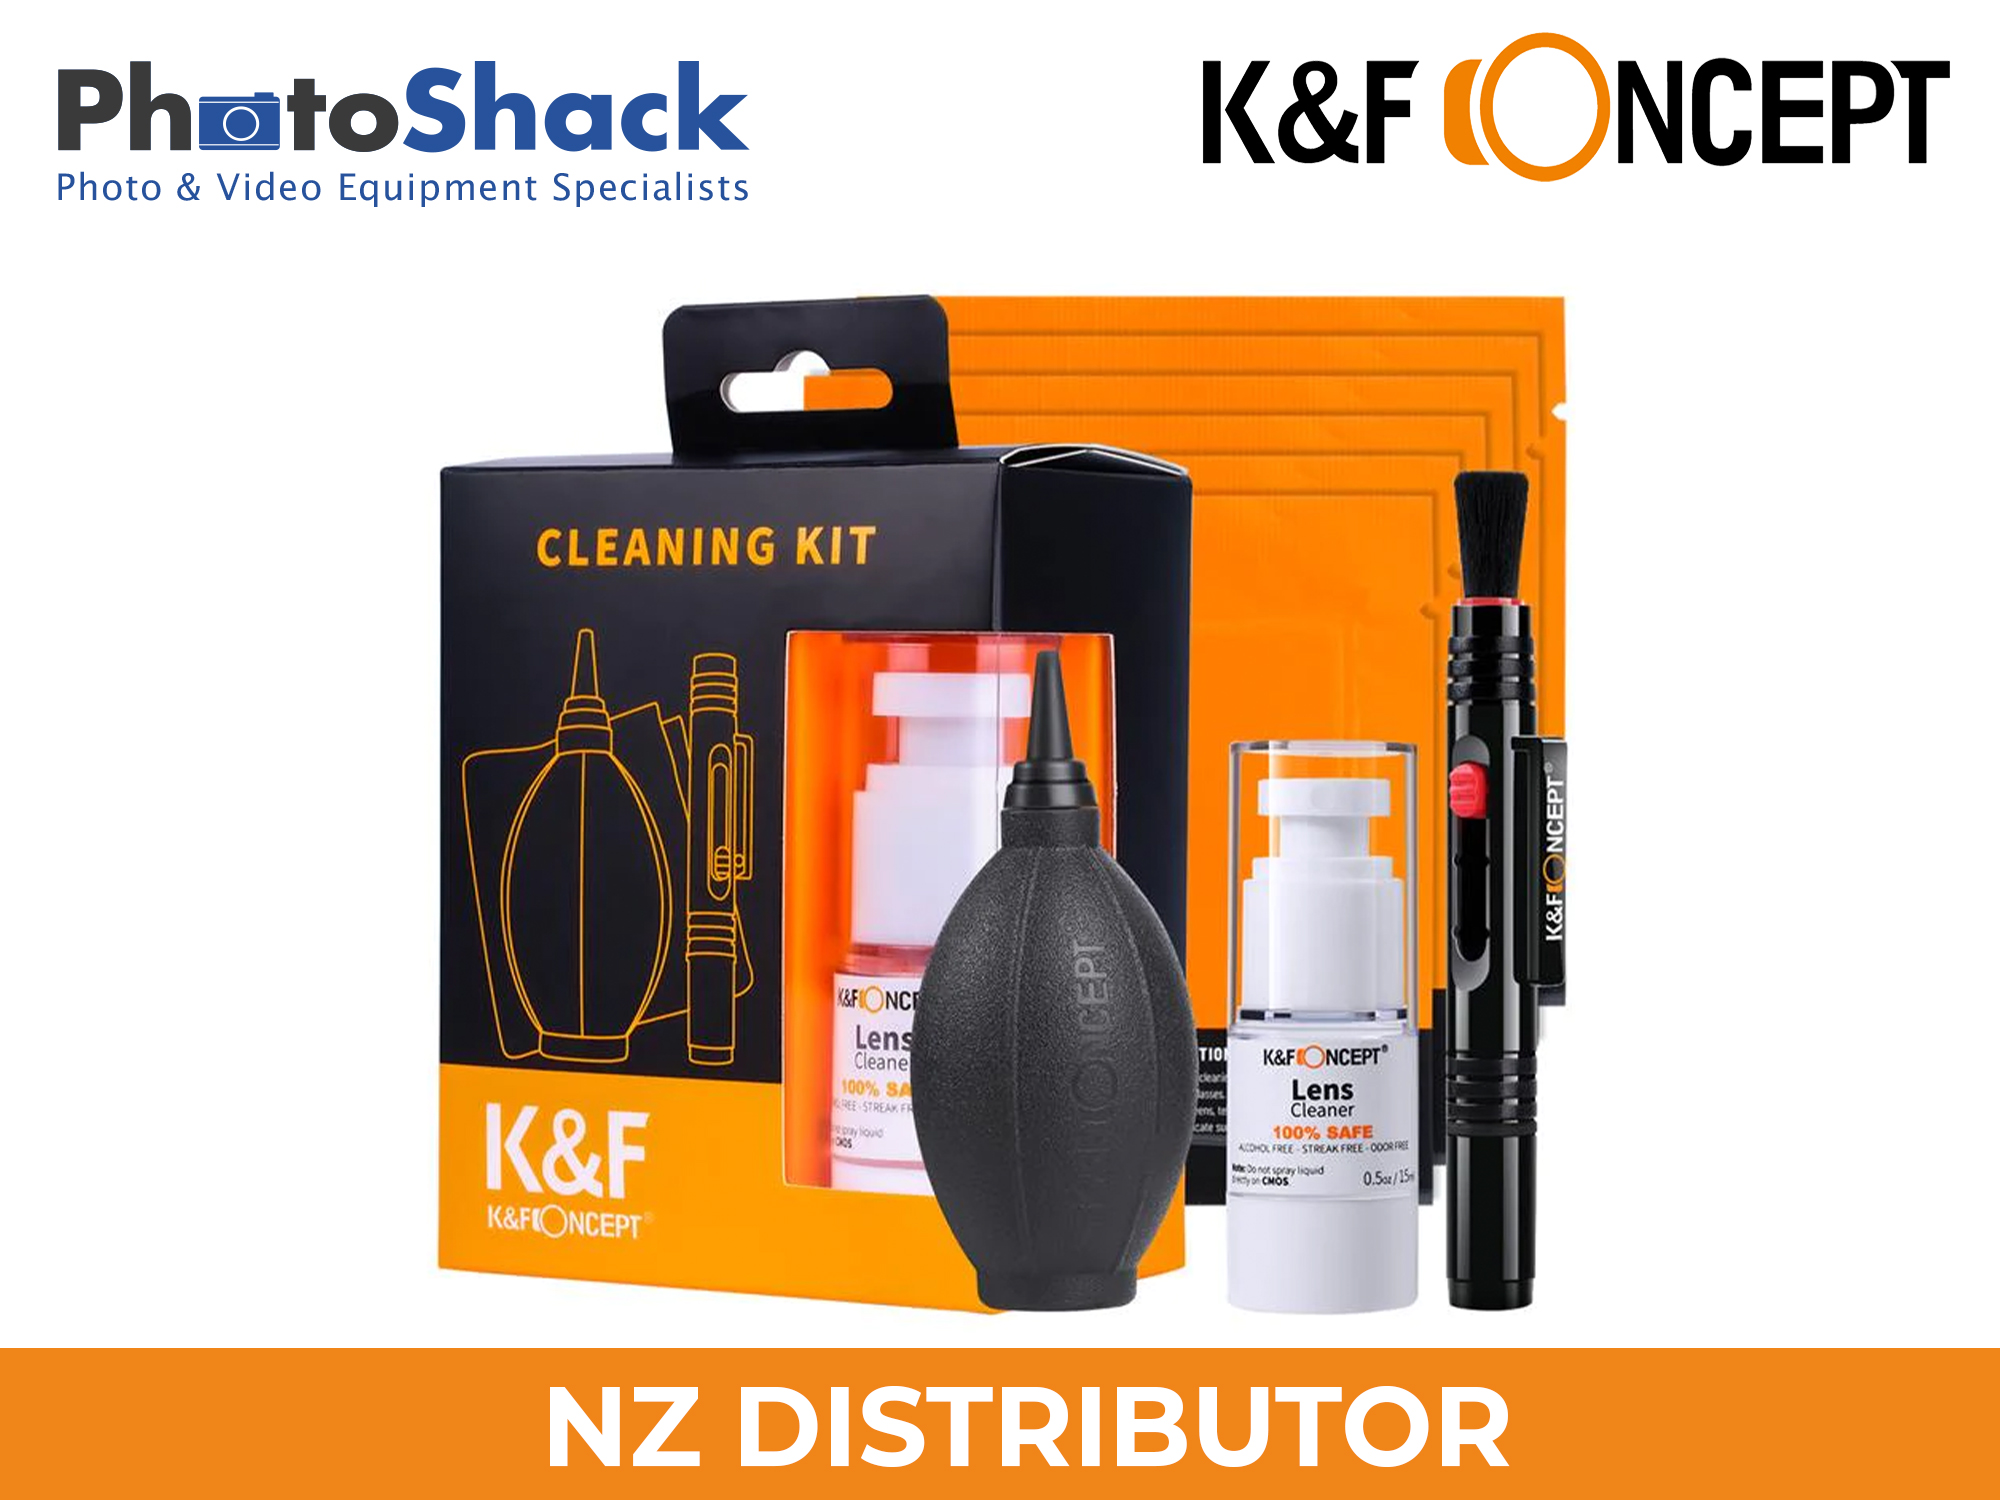 K&F 4-In-1 Camera Lens Cleaning Kit (Cleaning Pen + Air Blower + Cleaning Cloth + Cleaning Solution)